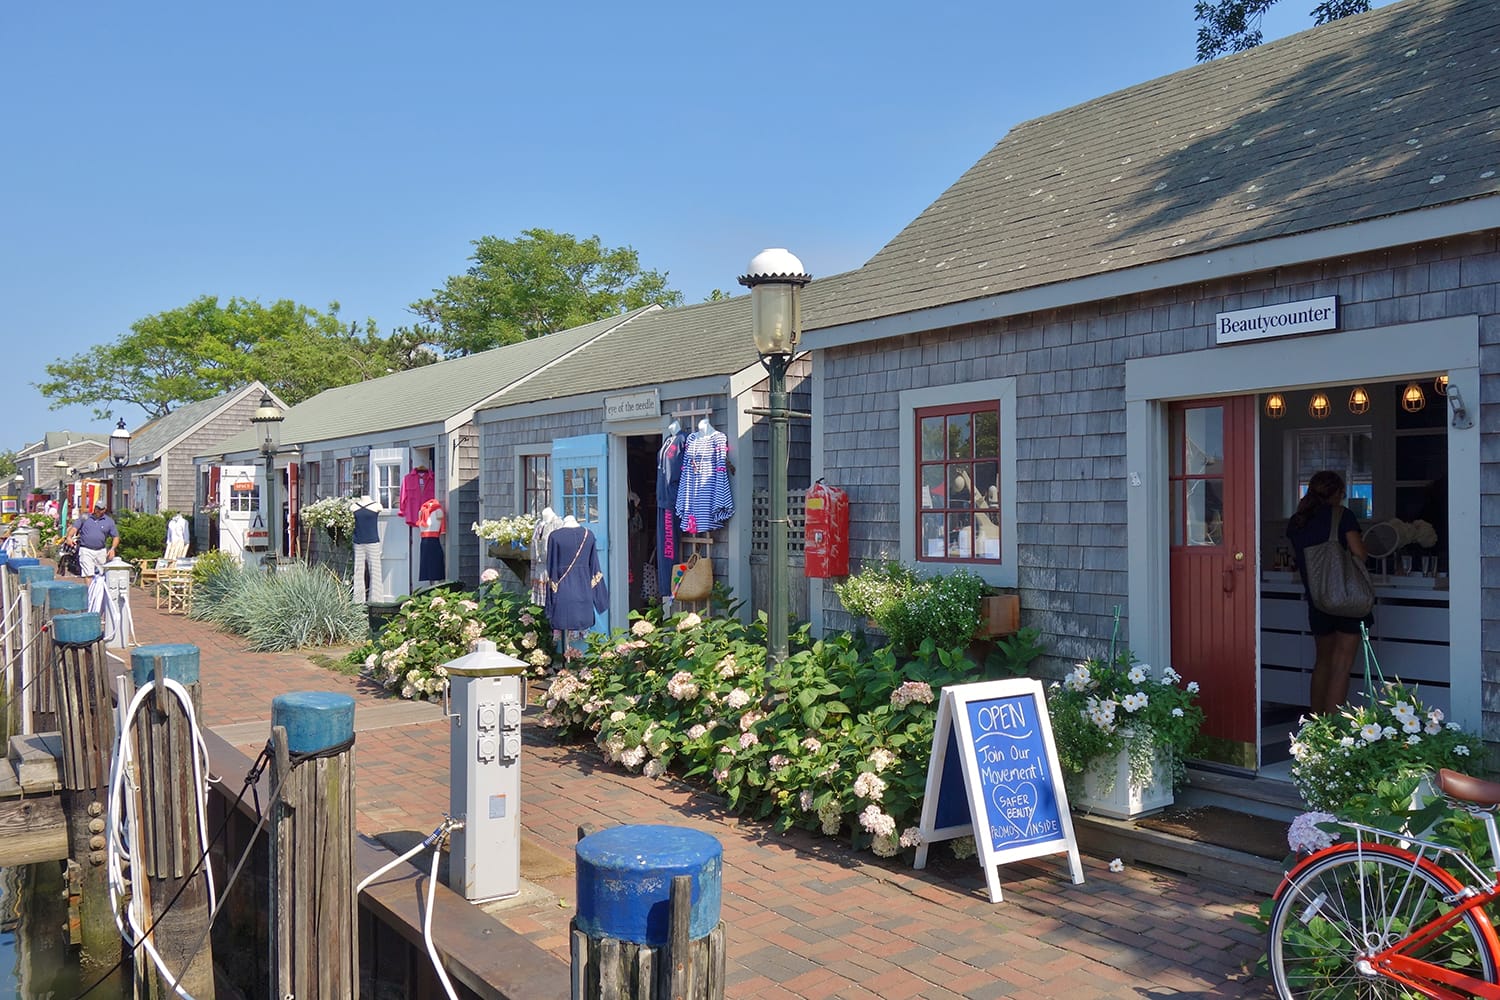 Traditional New England buildings and stores on Nantucket Island in Massachusetts, USA